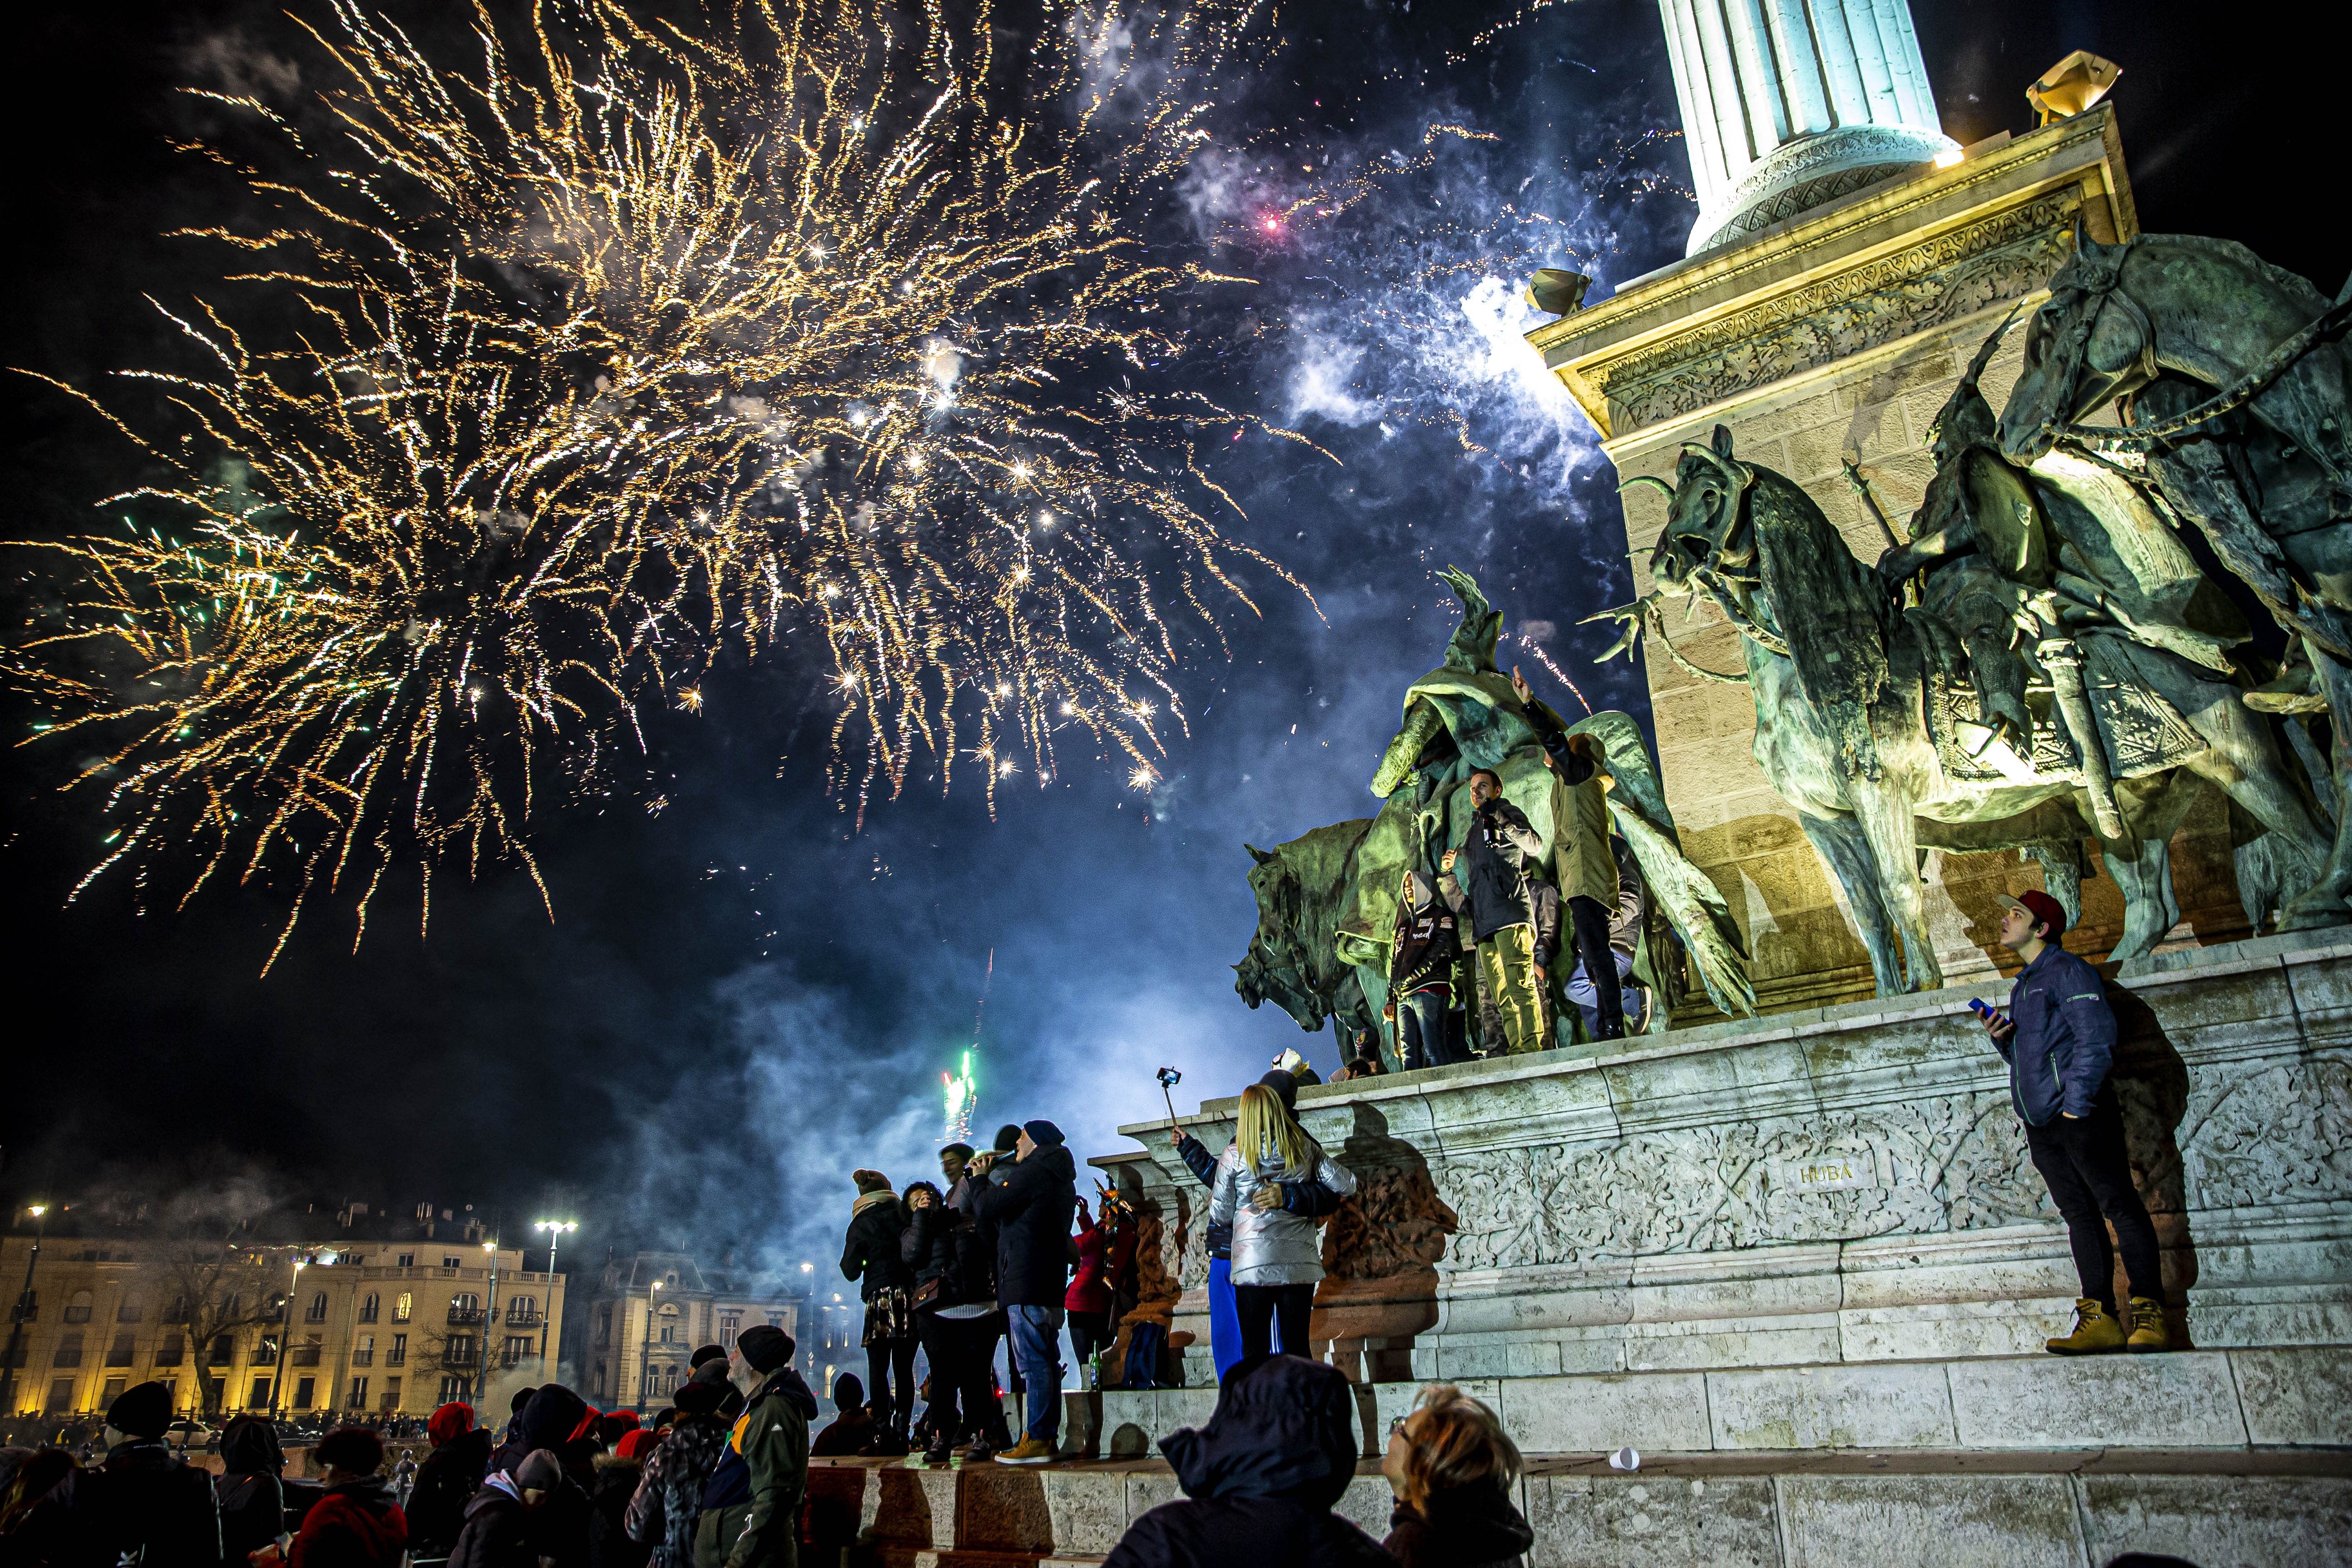 Fireworks light up the night sky over Heroes Square within the new year celebrations in Budapest, Hungary on January 01